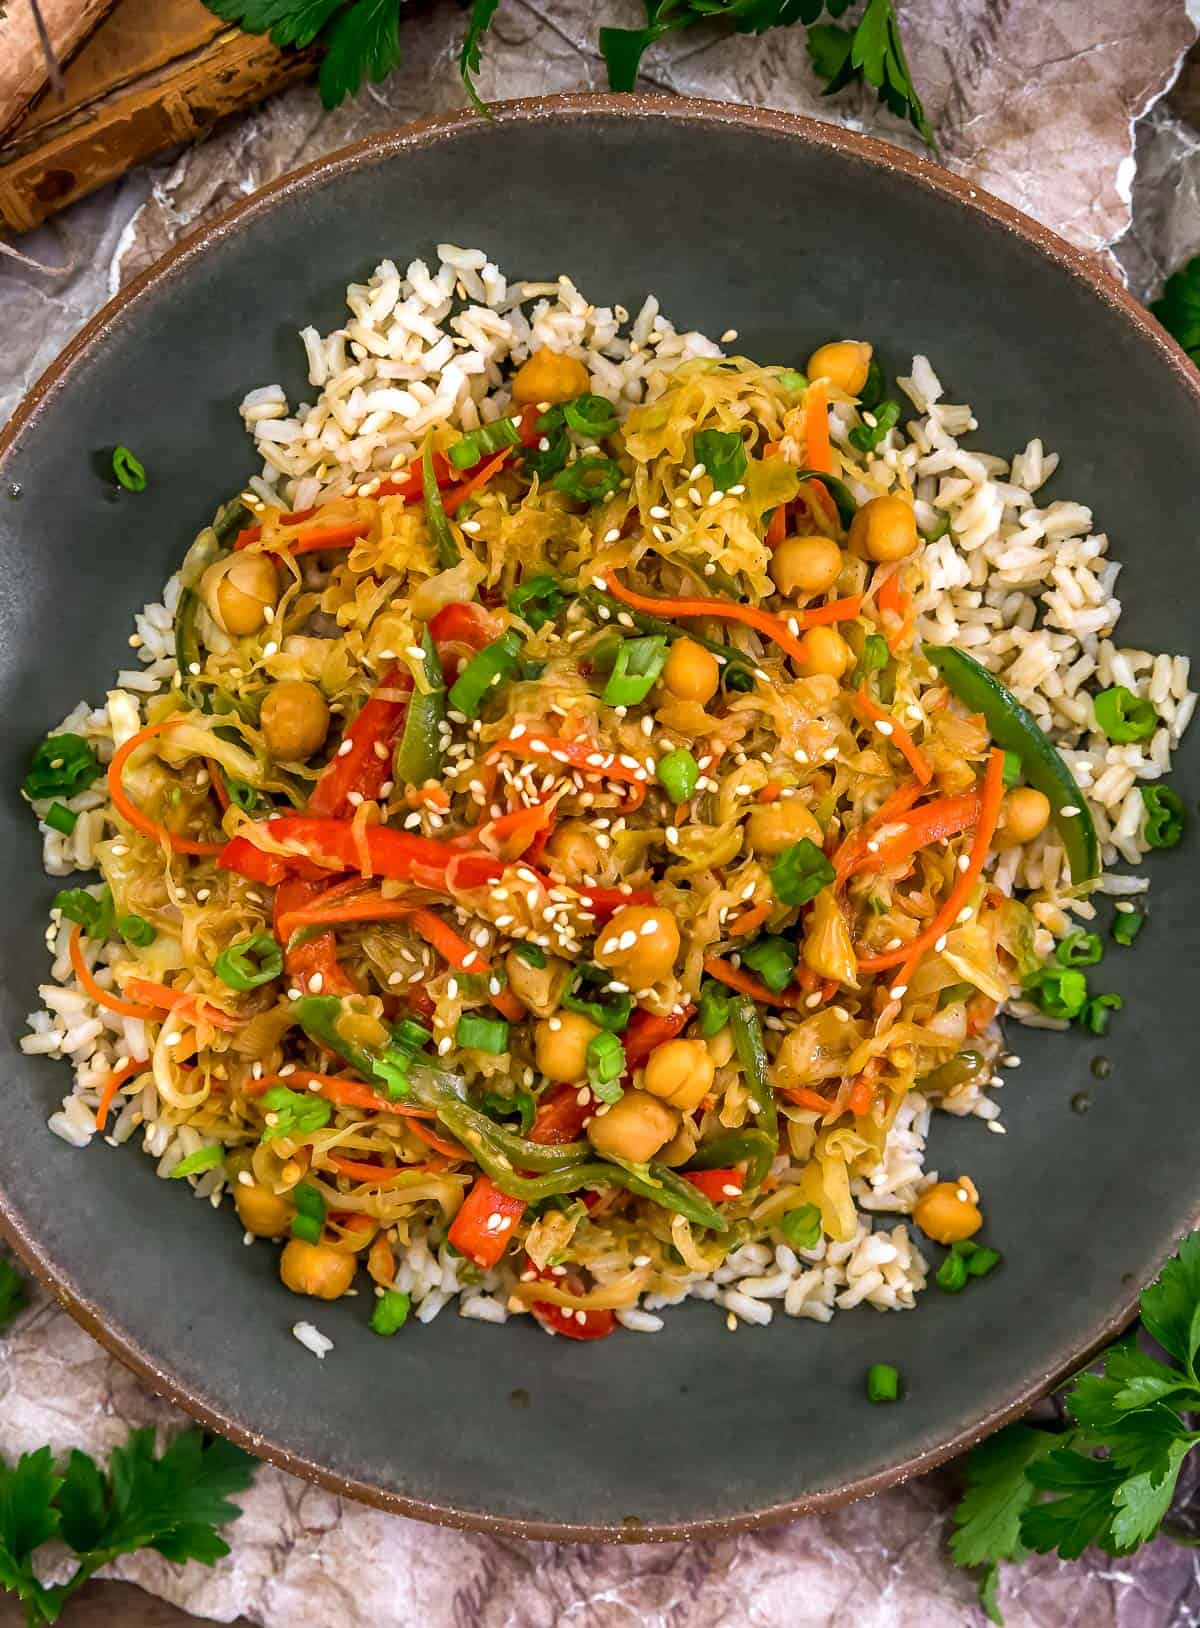 Plate of Szechuan Cabbage Chickpea Skillet